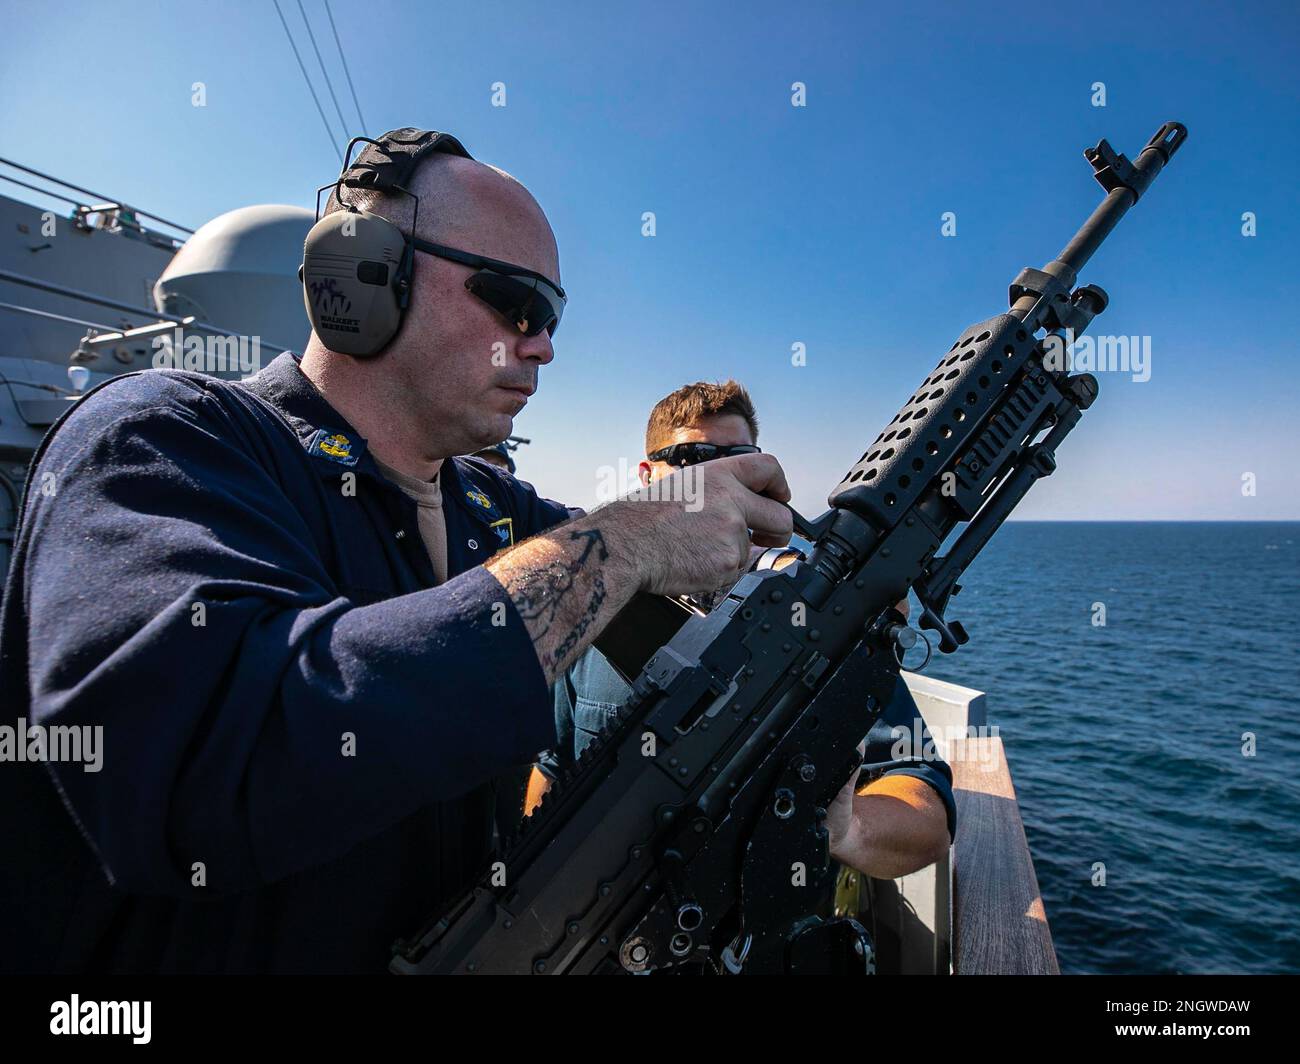 221127-N-UL352-1327 ARABIAN GULF (Nov. 27, 2022) Chief Fire Controlman Matthew McQuade, assigned to the guided-missile destroyer USS Delbert D. Black (DDG 119), changes the barrel of an M240B machine gun during a live-fire weapons qualification shoot in the Arabian Gulf, Nov. 27. Delbert D. Black is deployed to the U.S. 5th Fleet area of operations to help ensure maritime security and stability in the Middle East region. Stock Photo